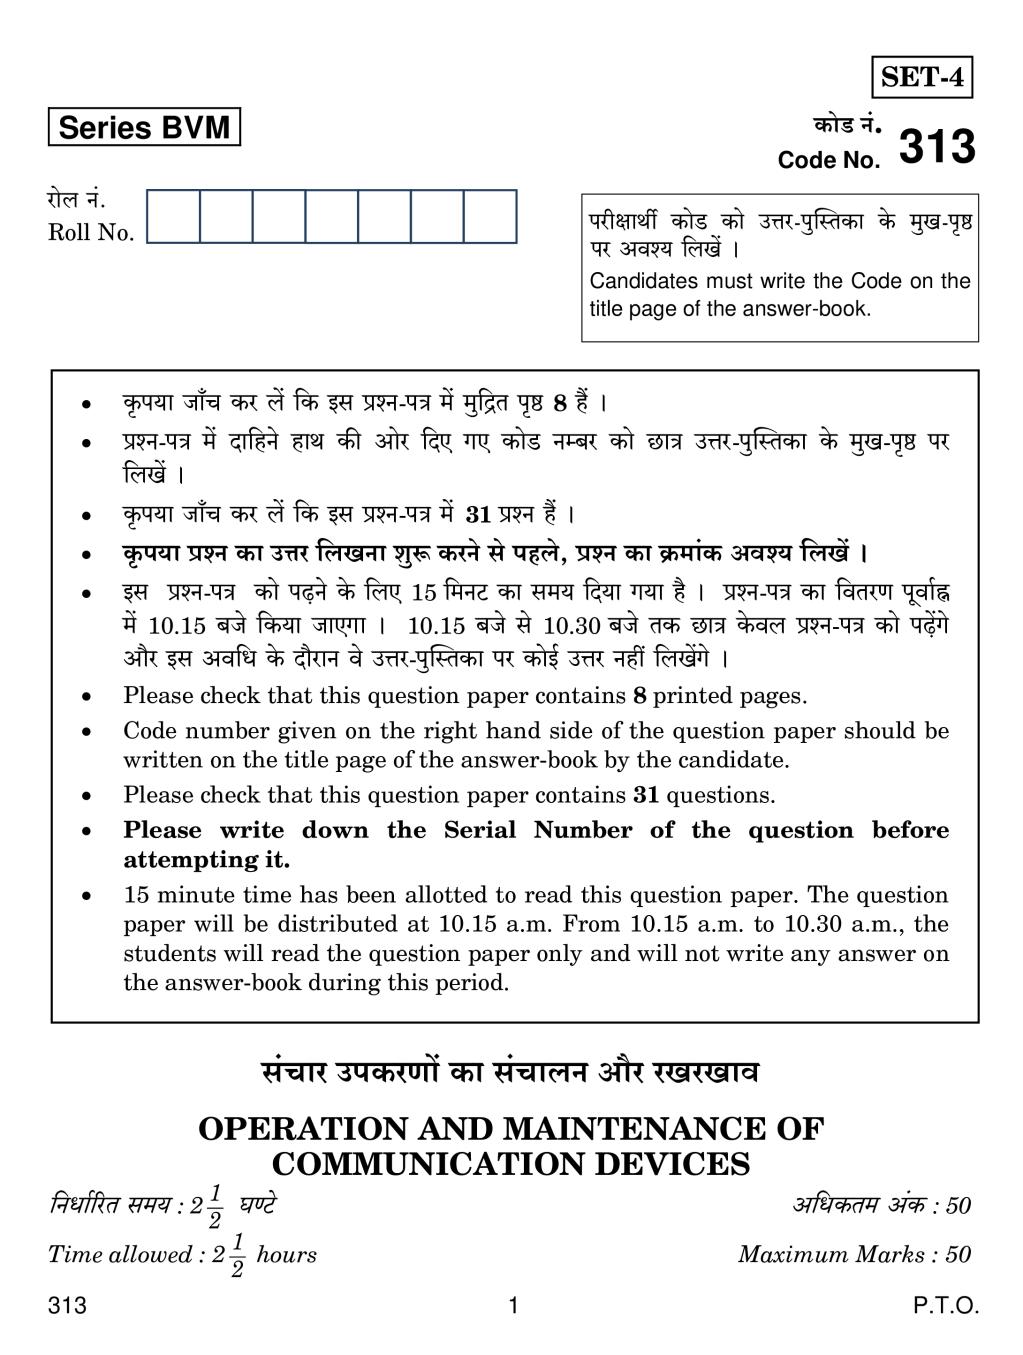 CBSE Class 12 Operation and Maintenance of Communication Devices Question Paper 2019 - Page 1